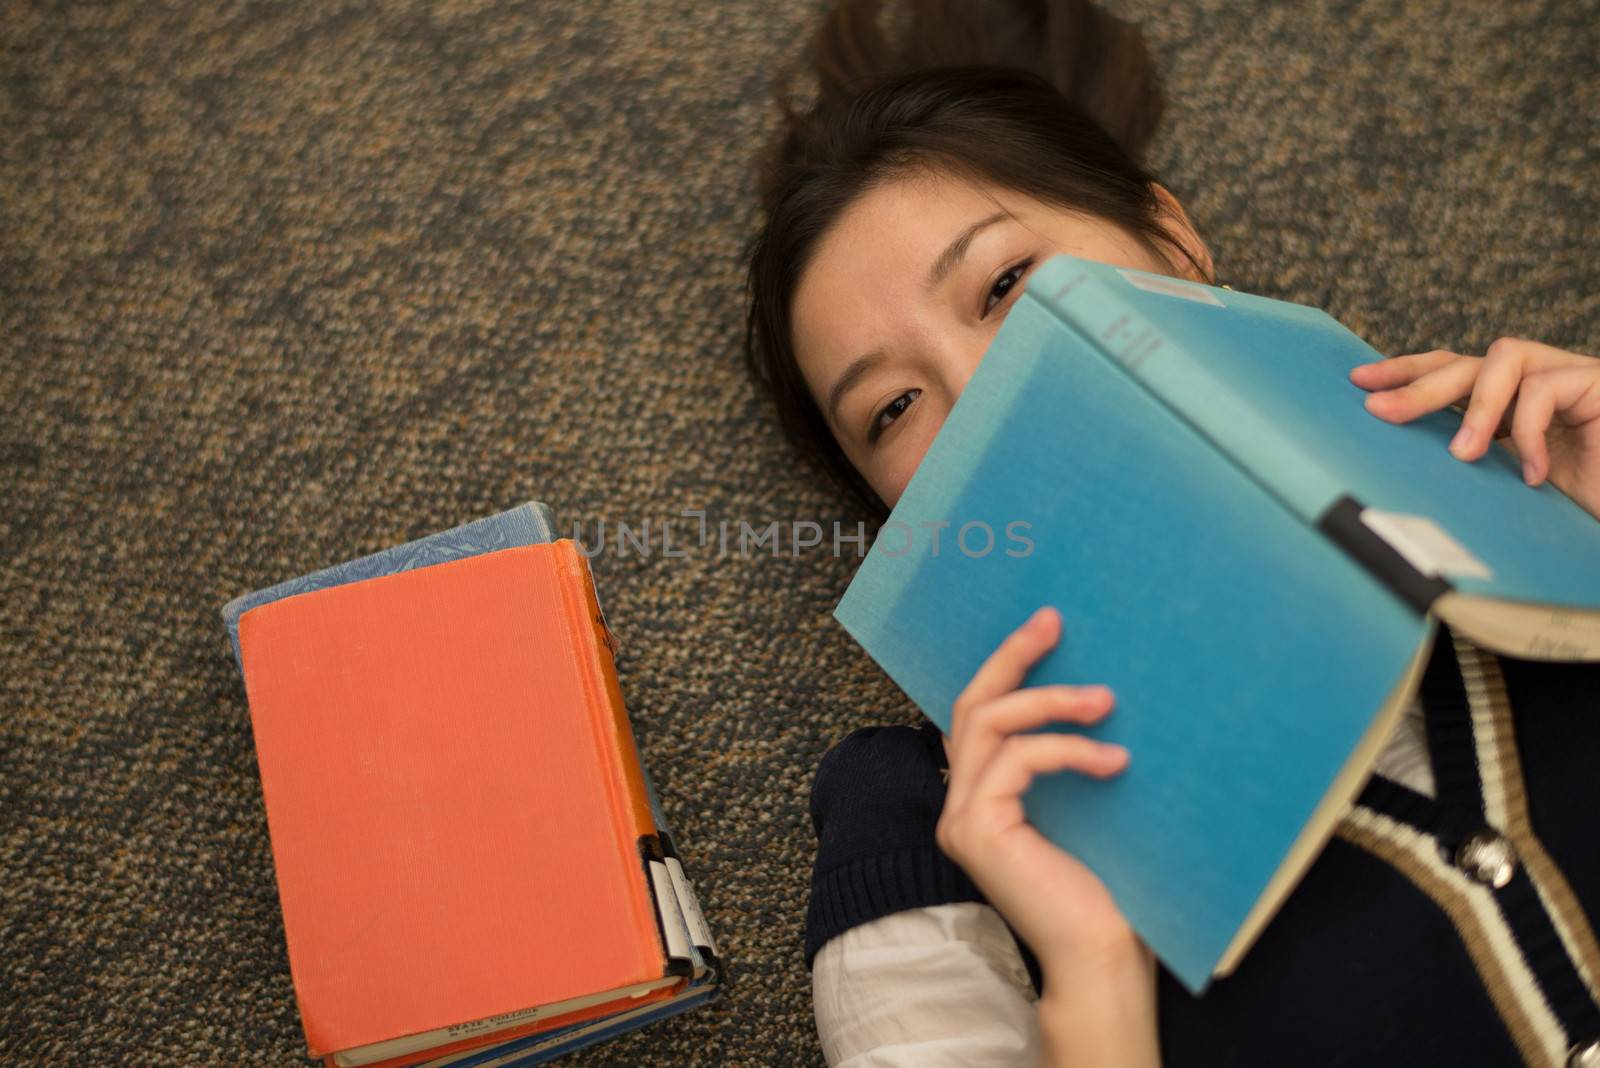 Fun young student laying on carpet with a book covering mouth next to a stack of books